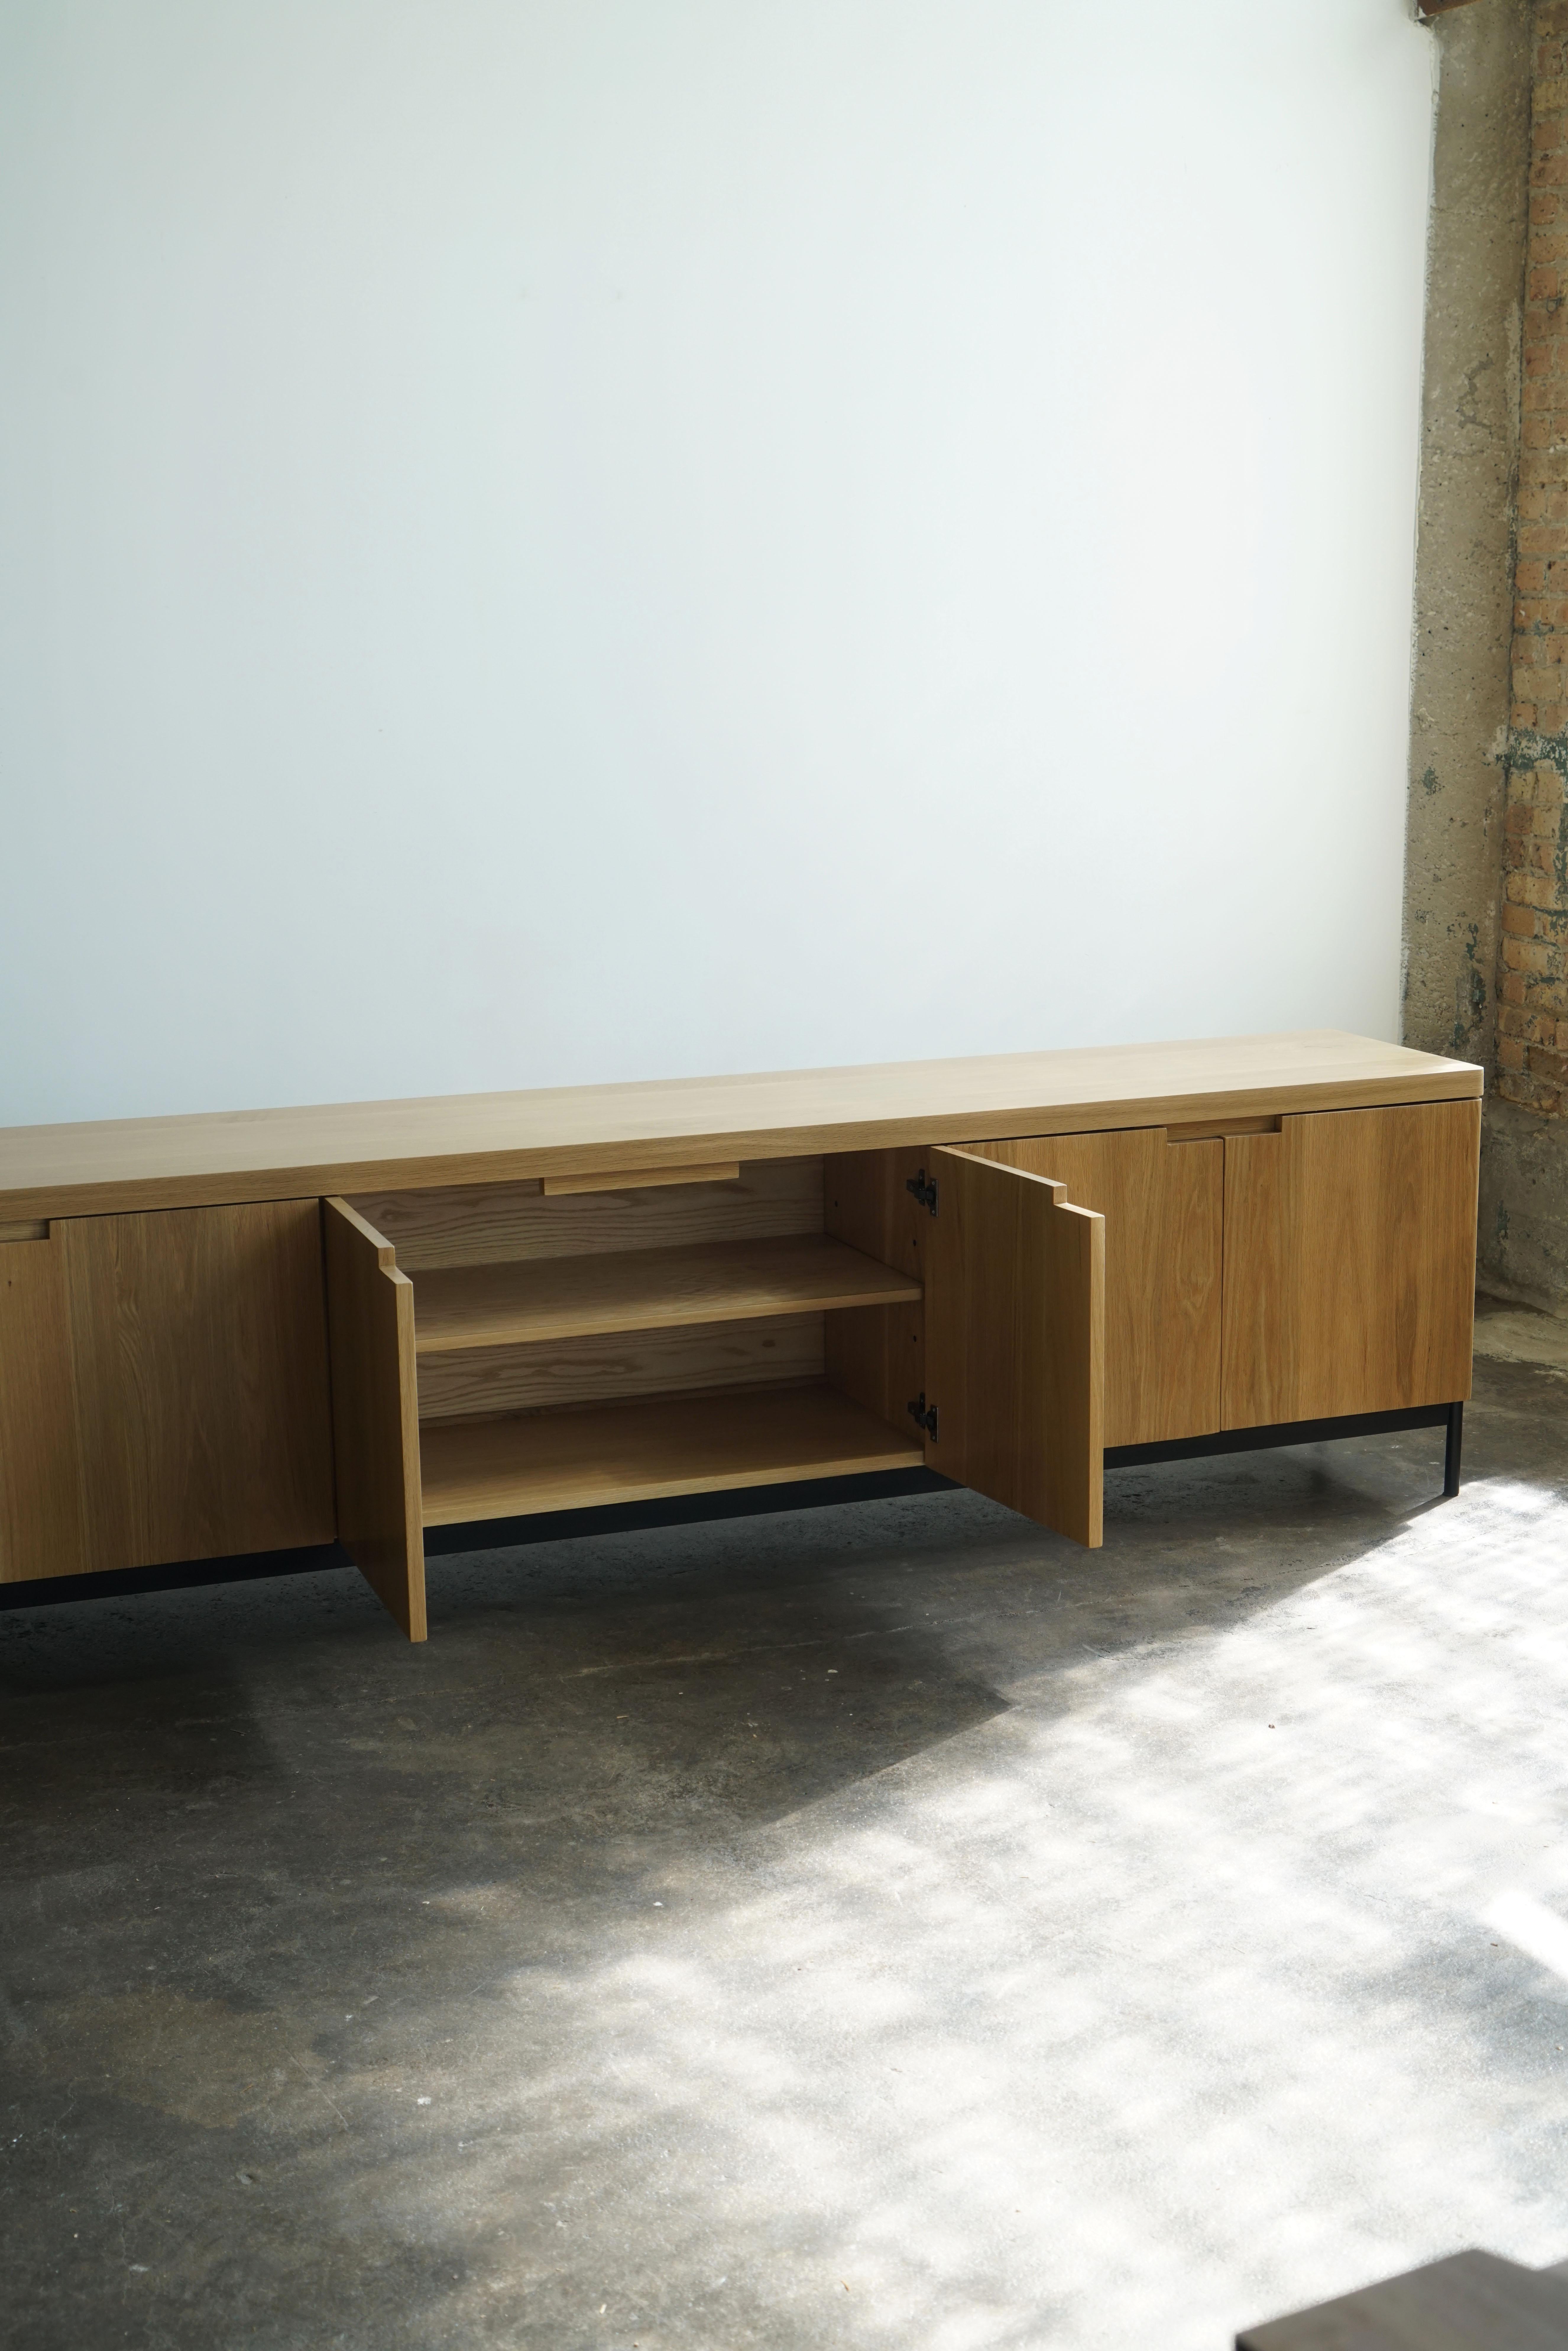 Steel Contemporary Solid White Oak Wood Credenza by Last Workshop, 2022